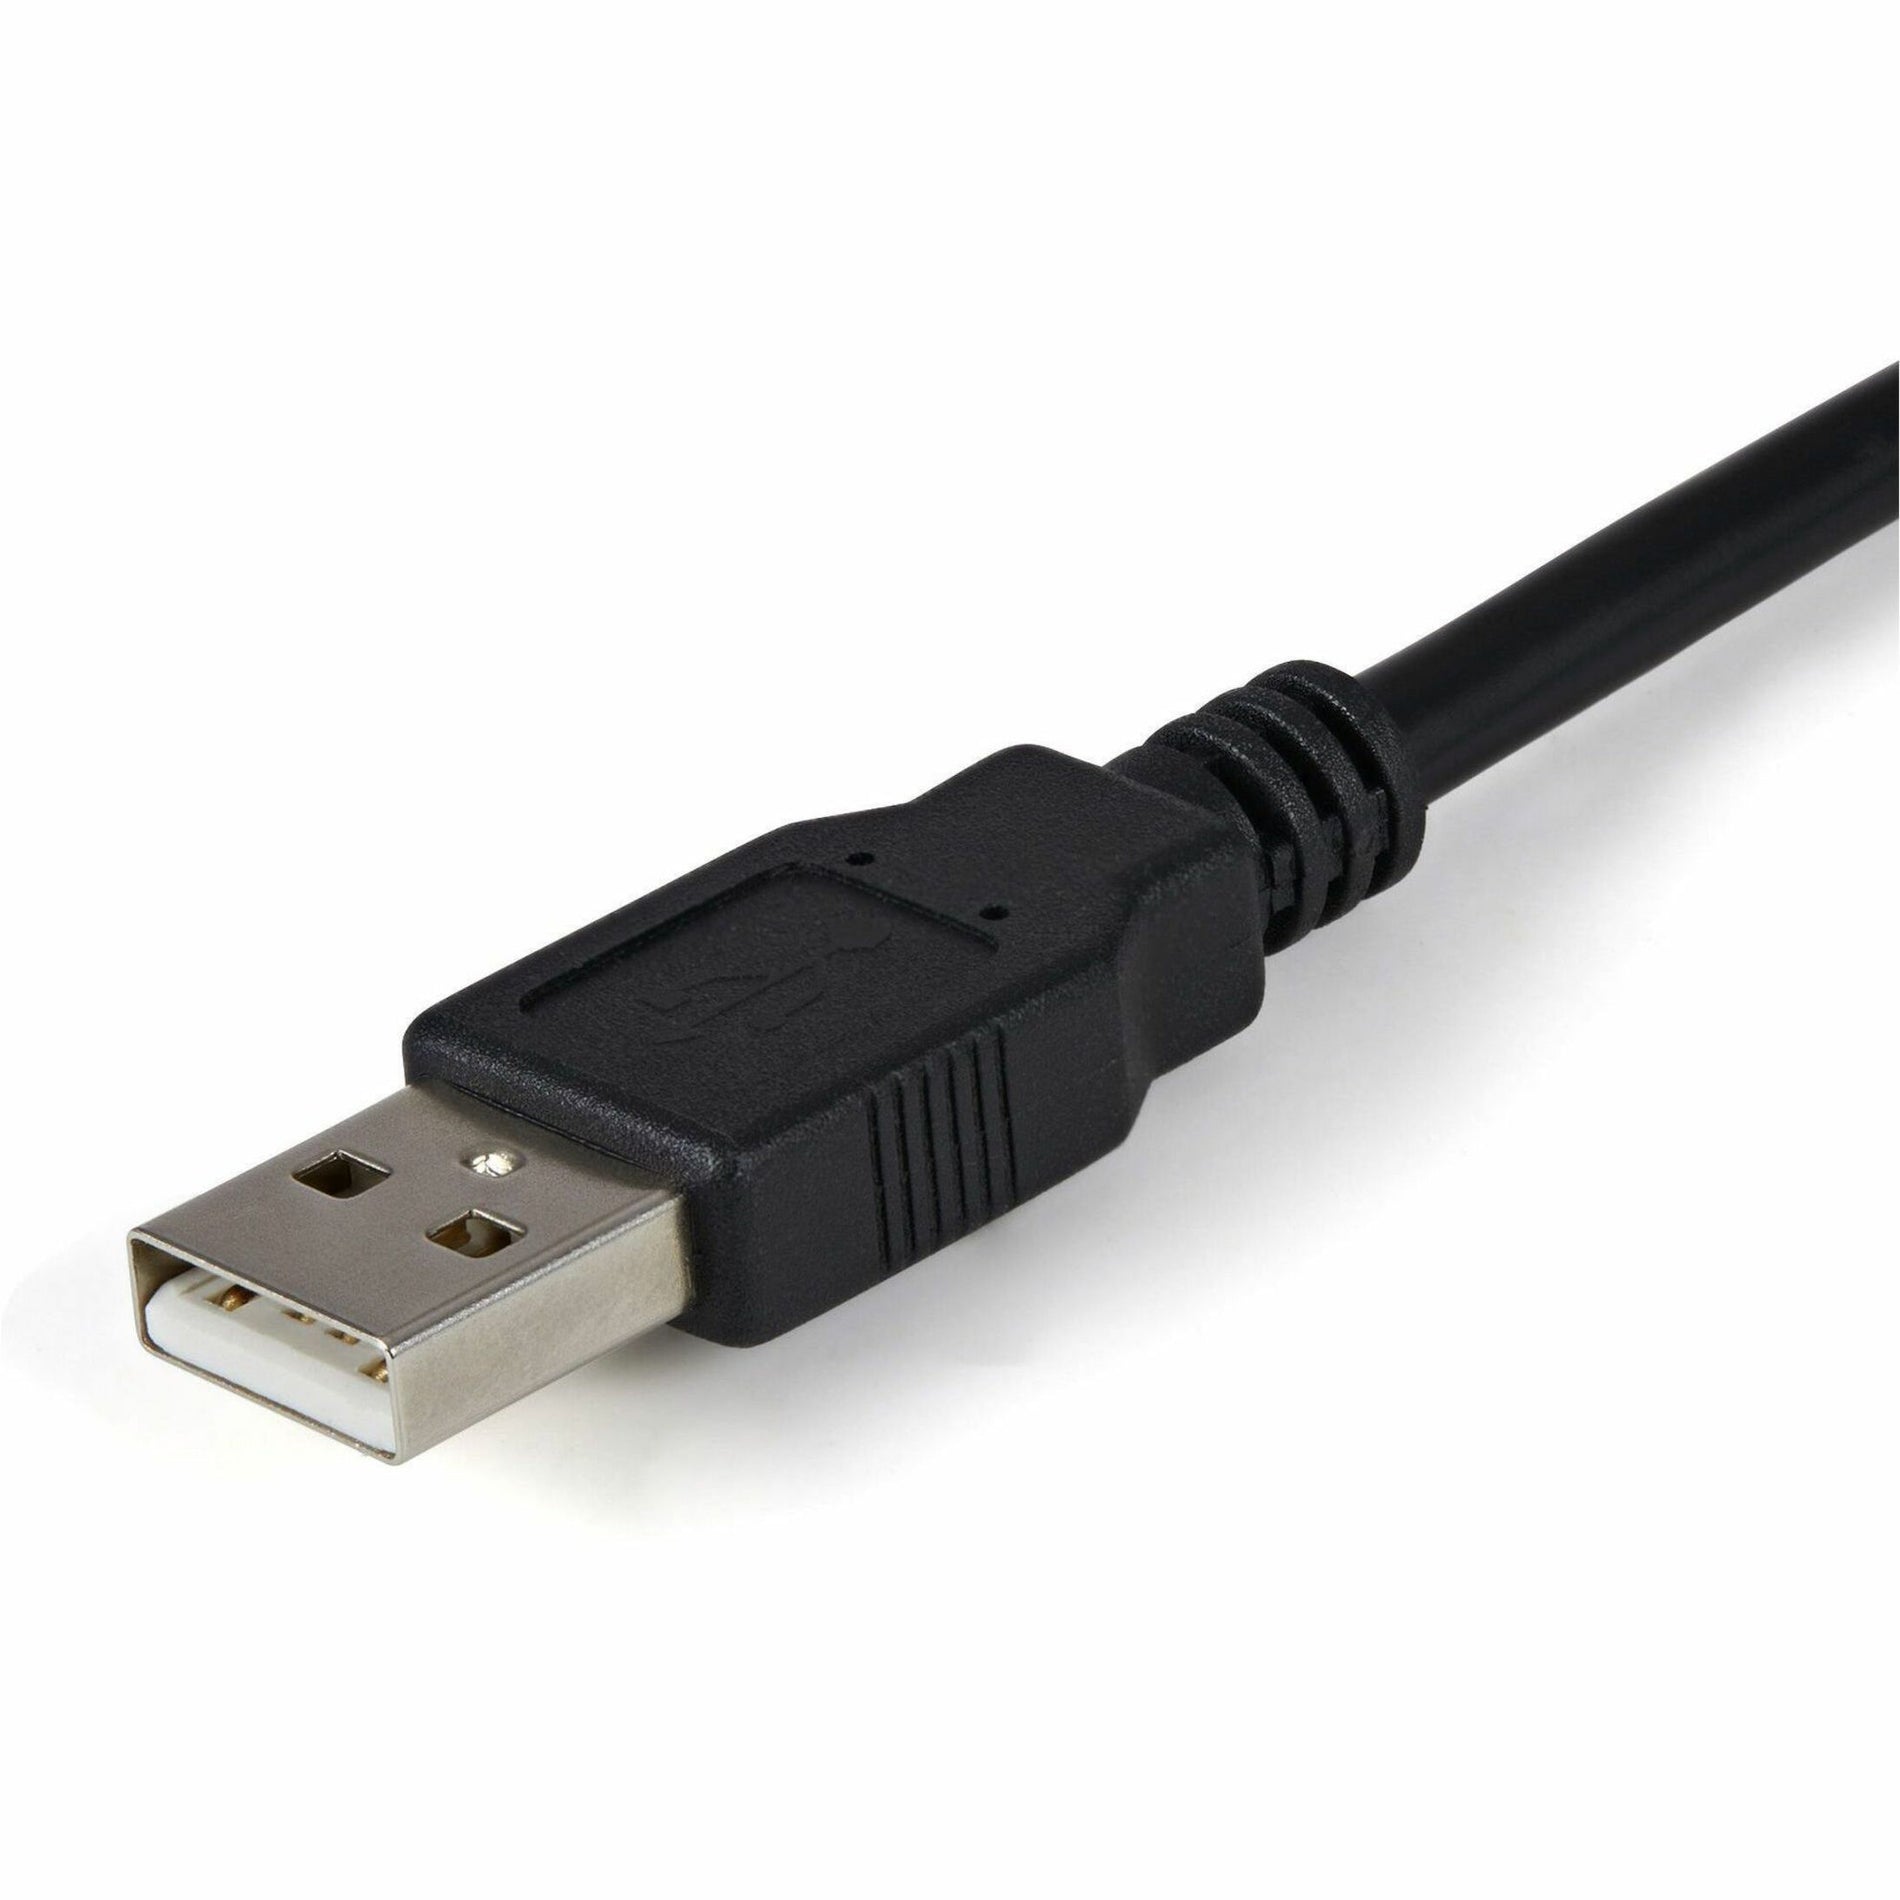 StarTech.com ICUSB2322F 2 Port FTDI USB to Serial RS232 Adapter Cable with COM Retention 6 ft Black